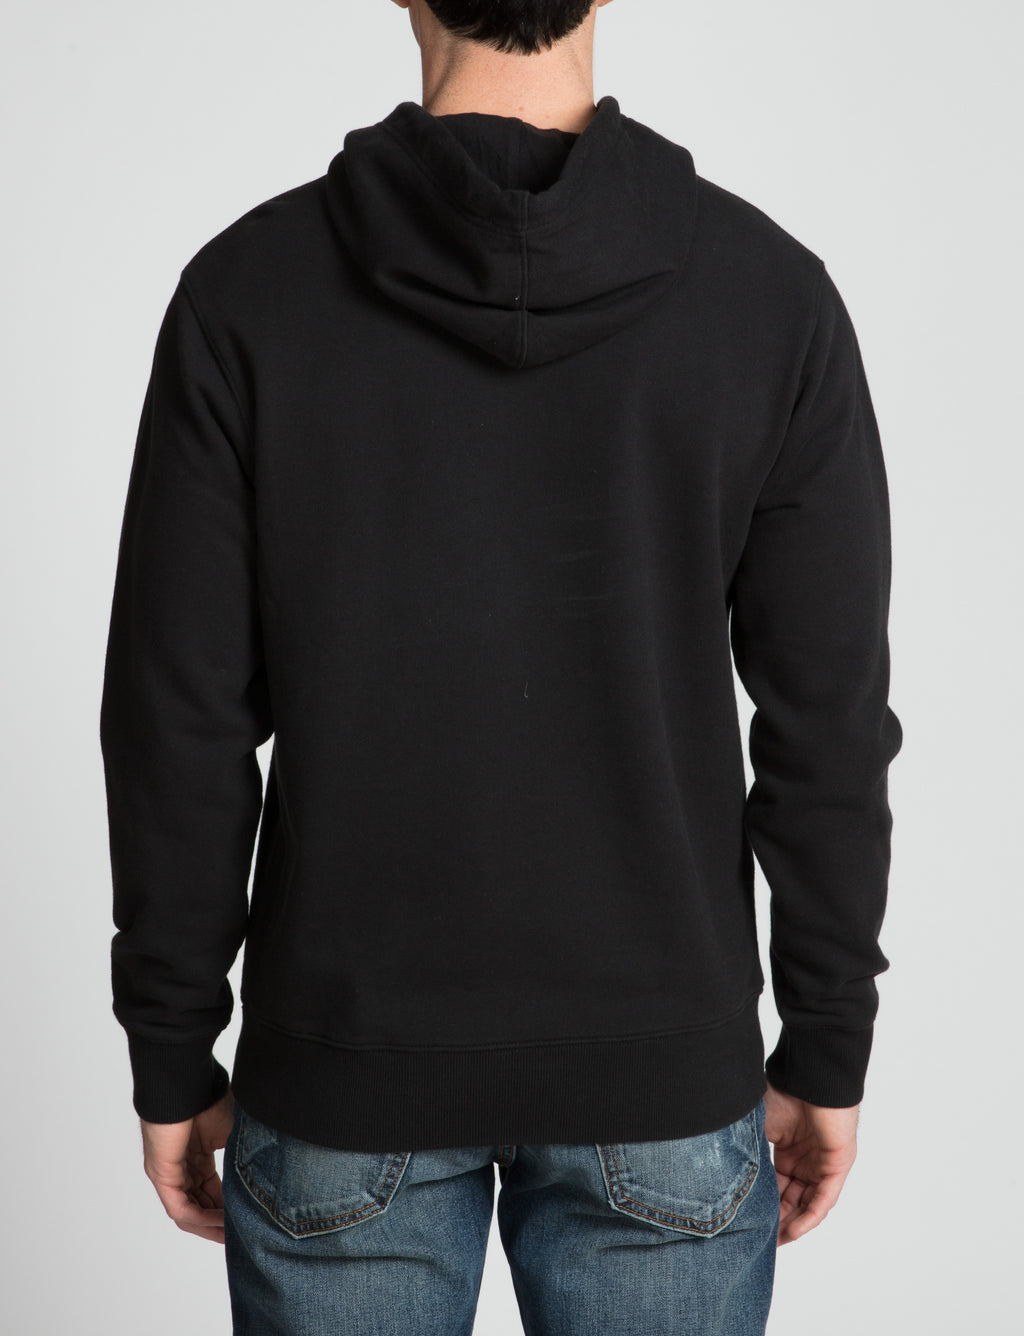 Prps Goods & Co. Hoodies and Sweaters | Prps Jeans